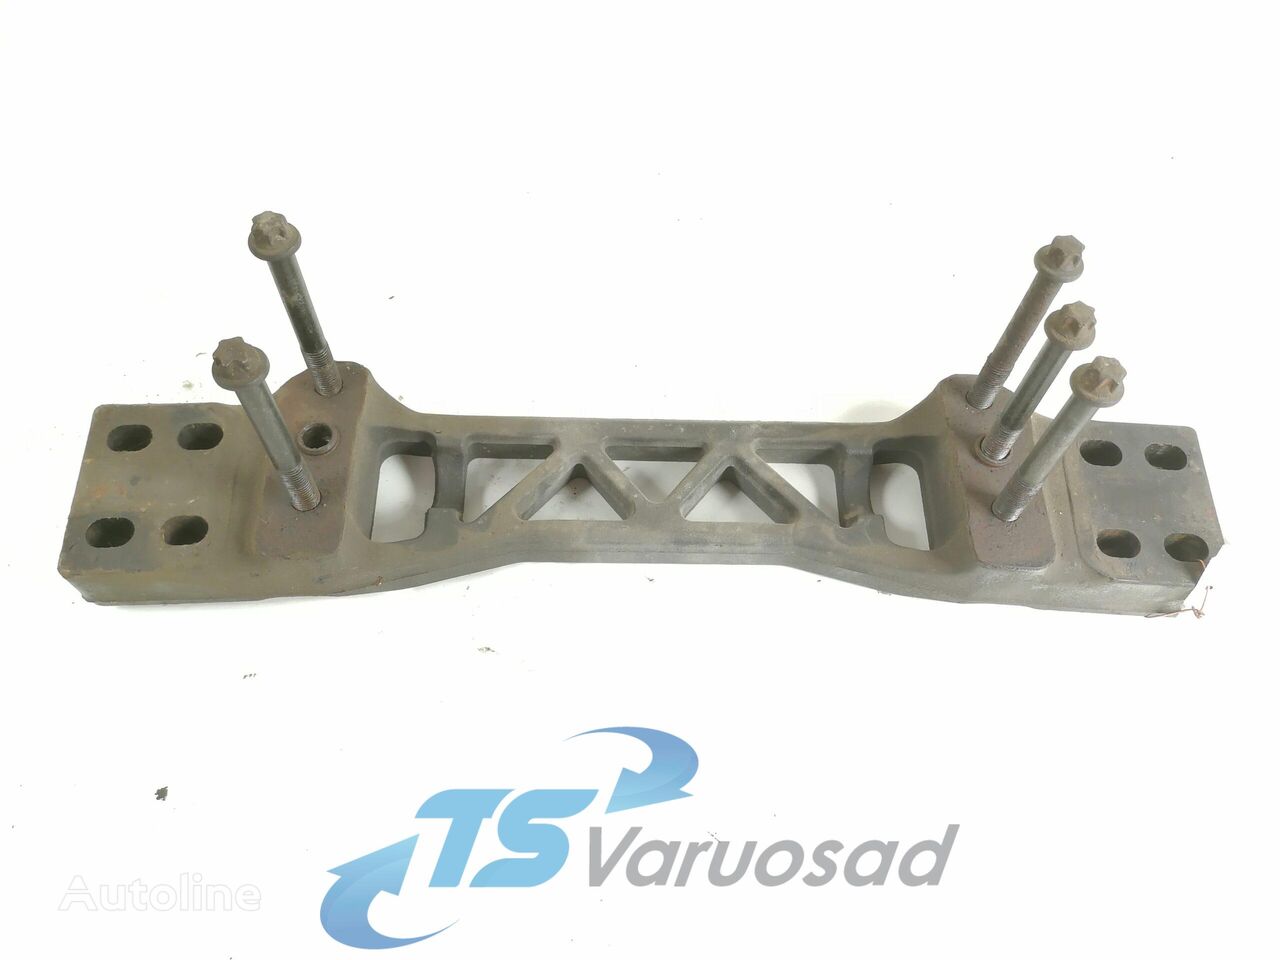 Scania Gearbox bracket 1743442 for Scania R440 truck tractor